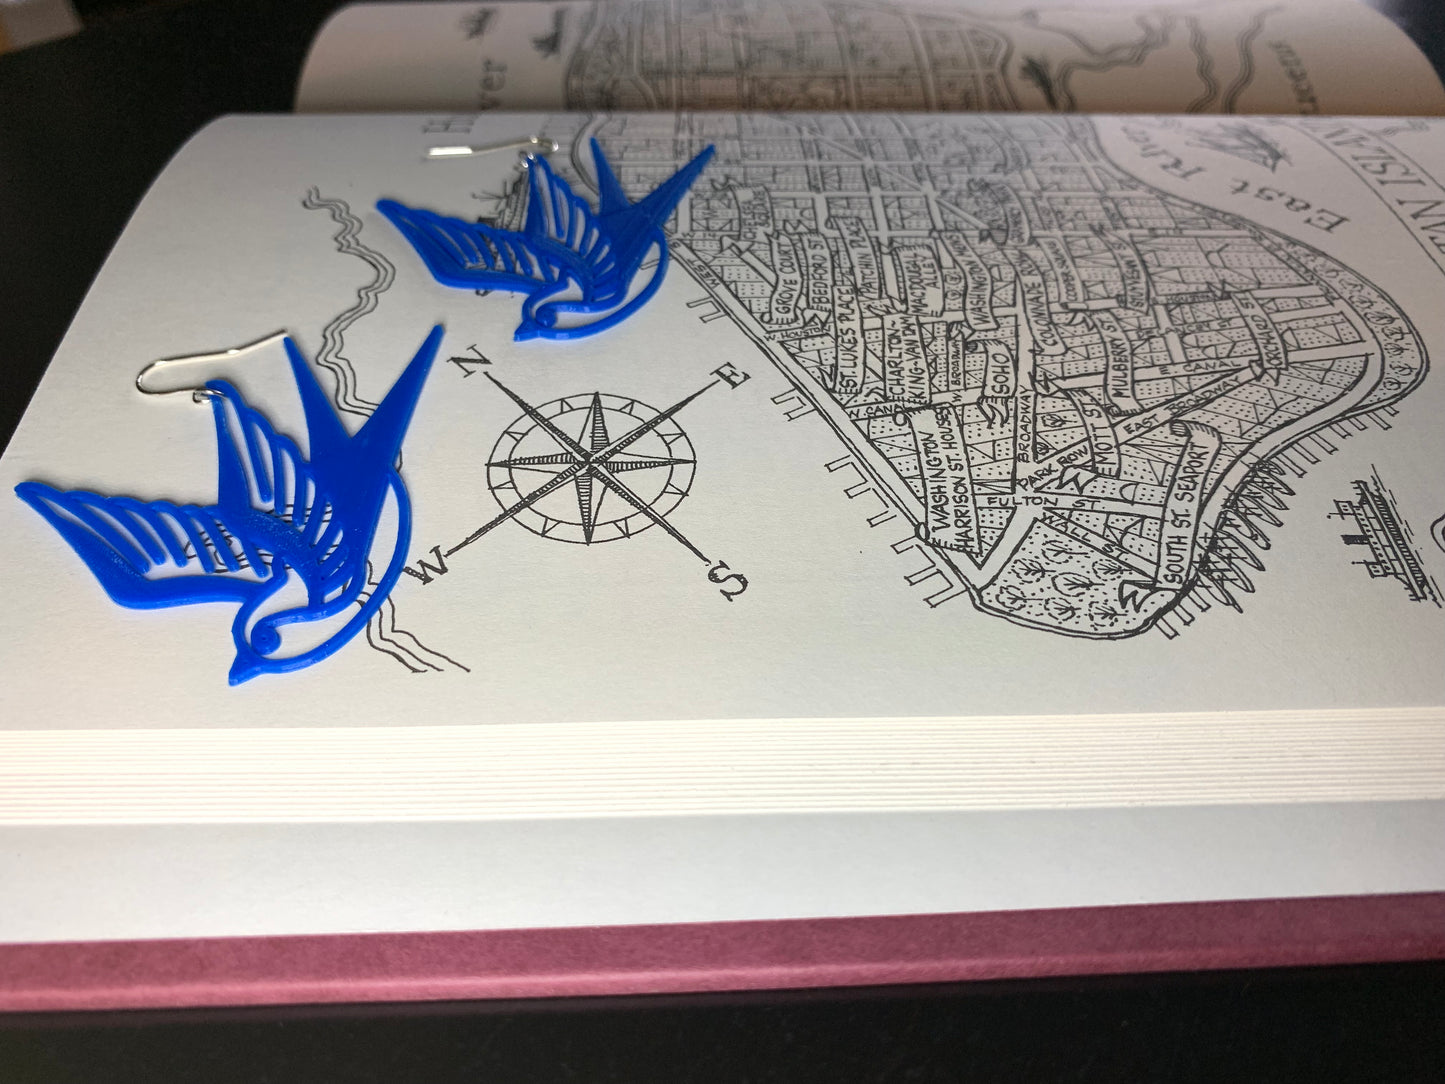 Laying on a book with a hand drawn compass are two bright cobalt blue swallow R+D 3D printed earrings. The shape of these birds is reminiscent of classic sailor tattoos.